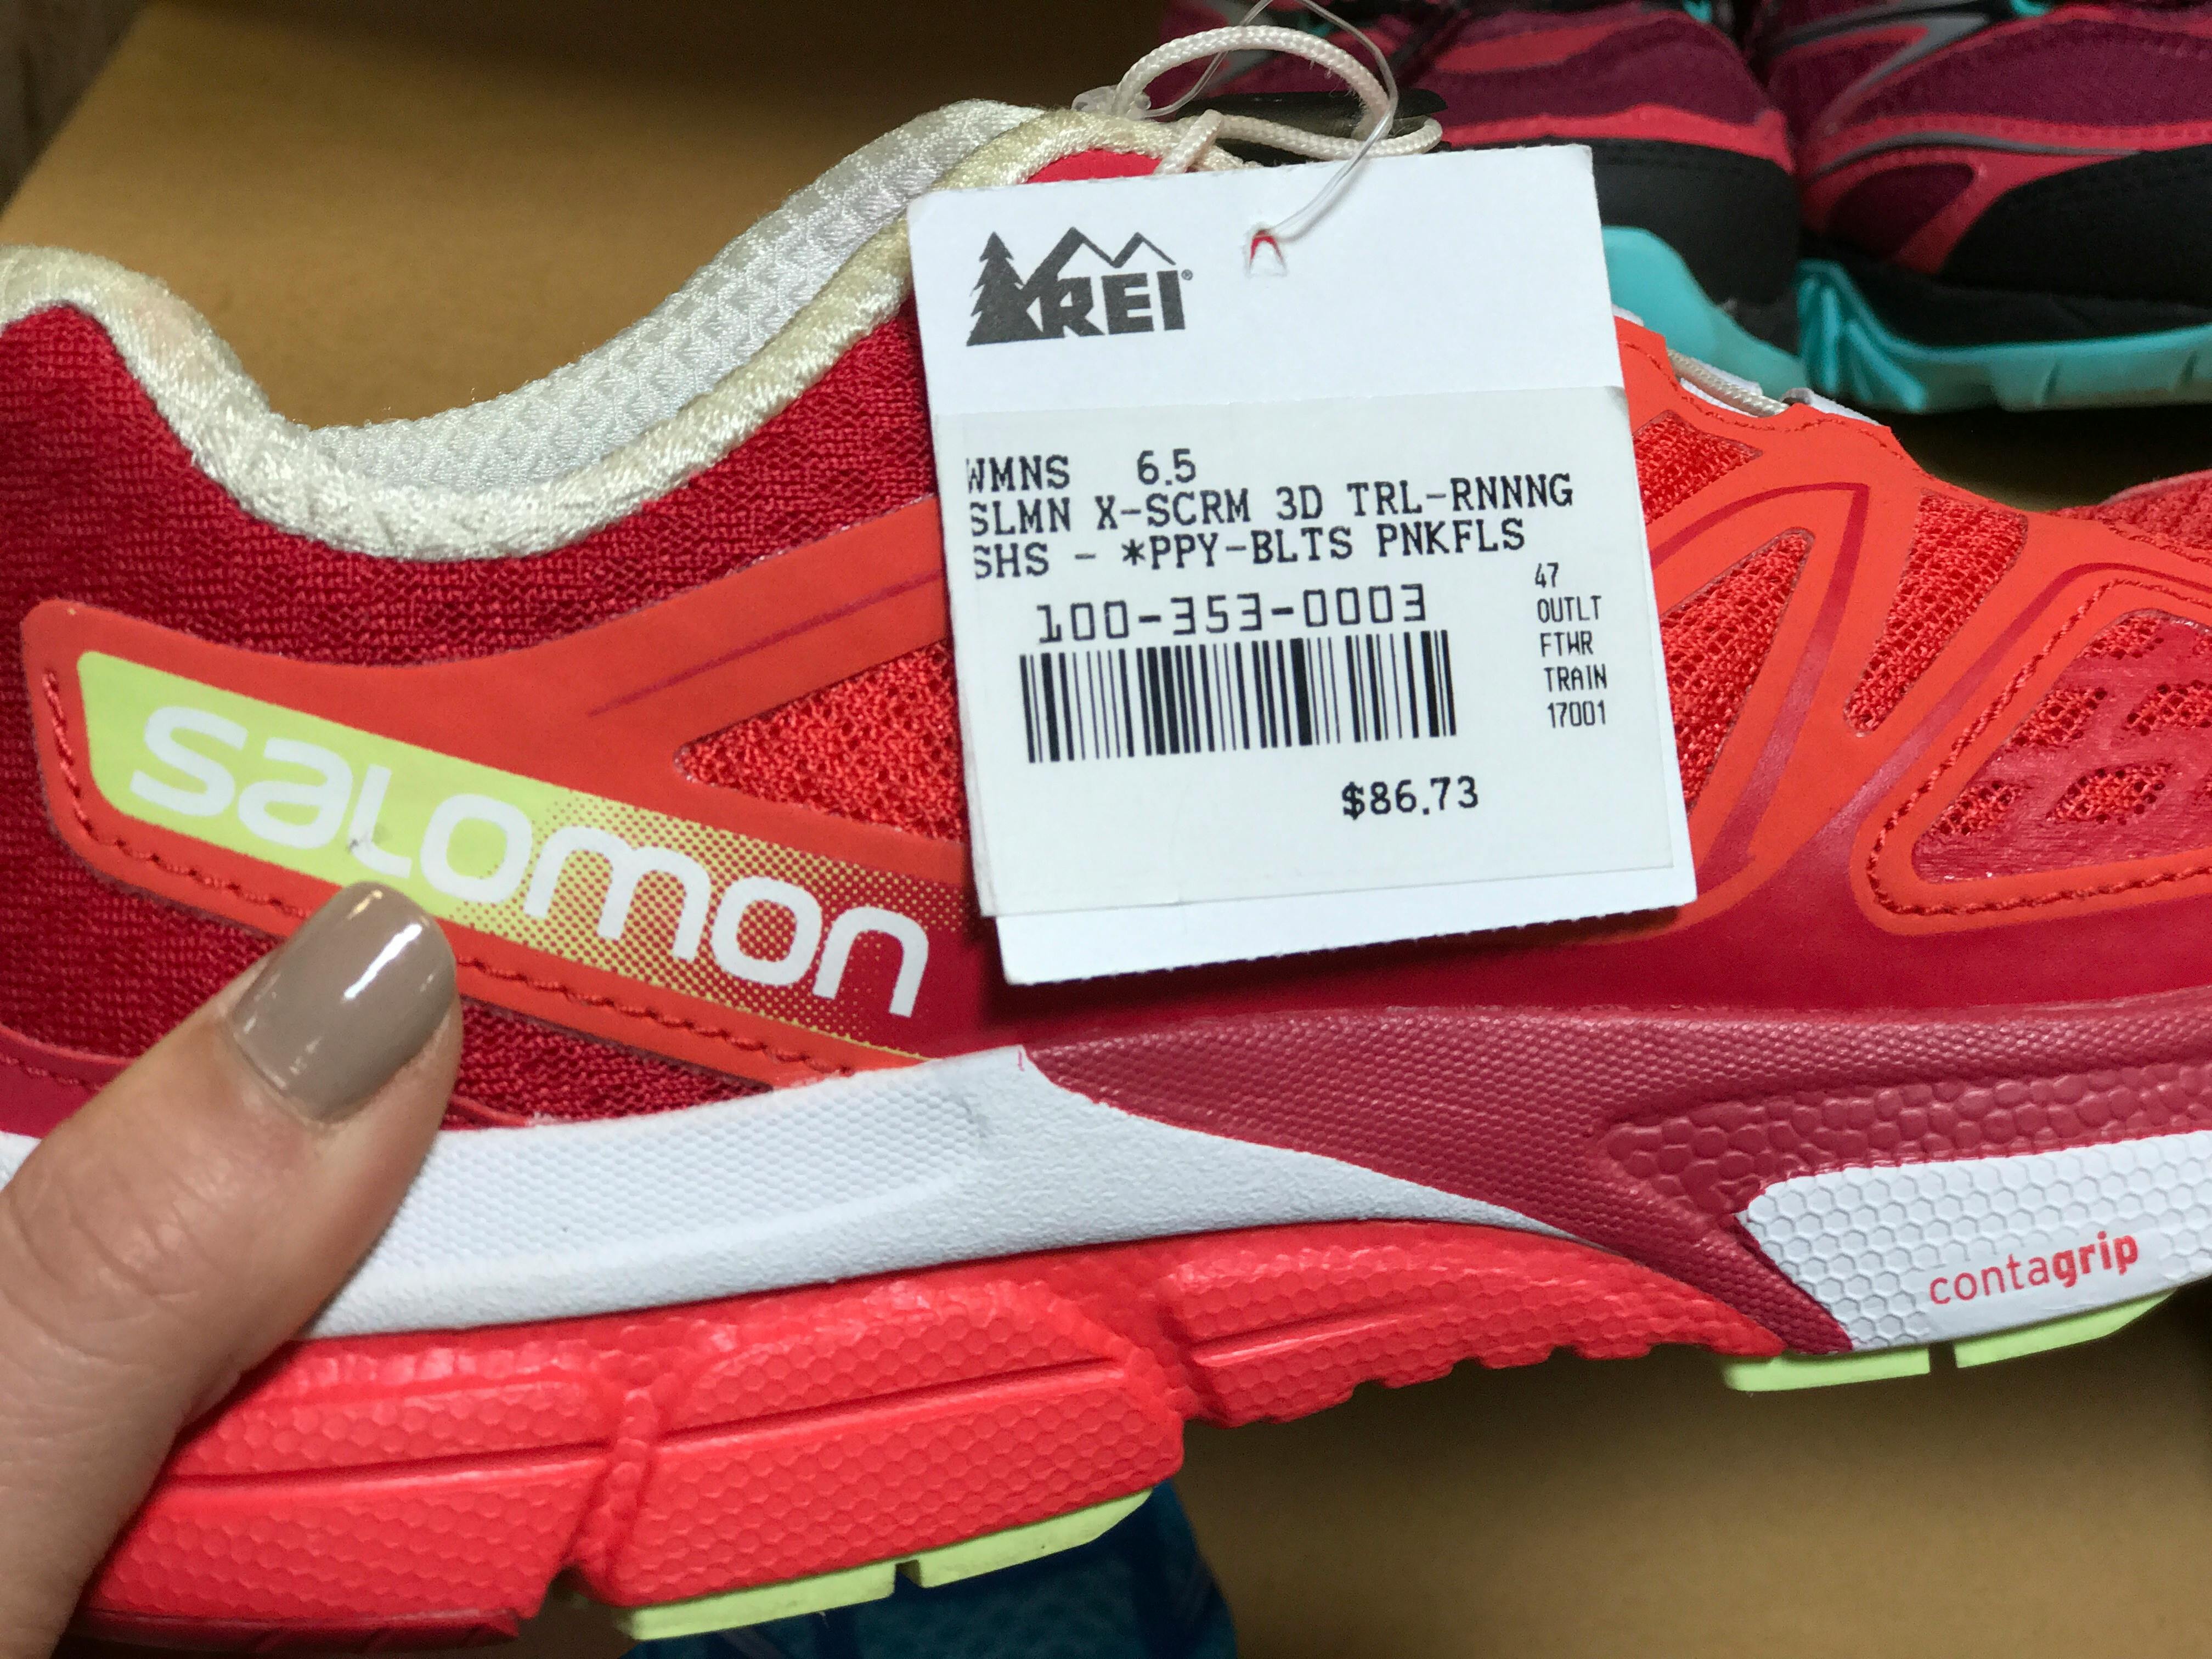 A close up of a person's hand holding a Salomon sneaker and showing the tag at REI.